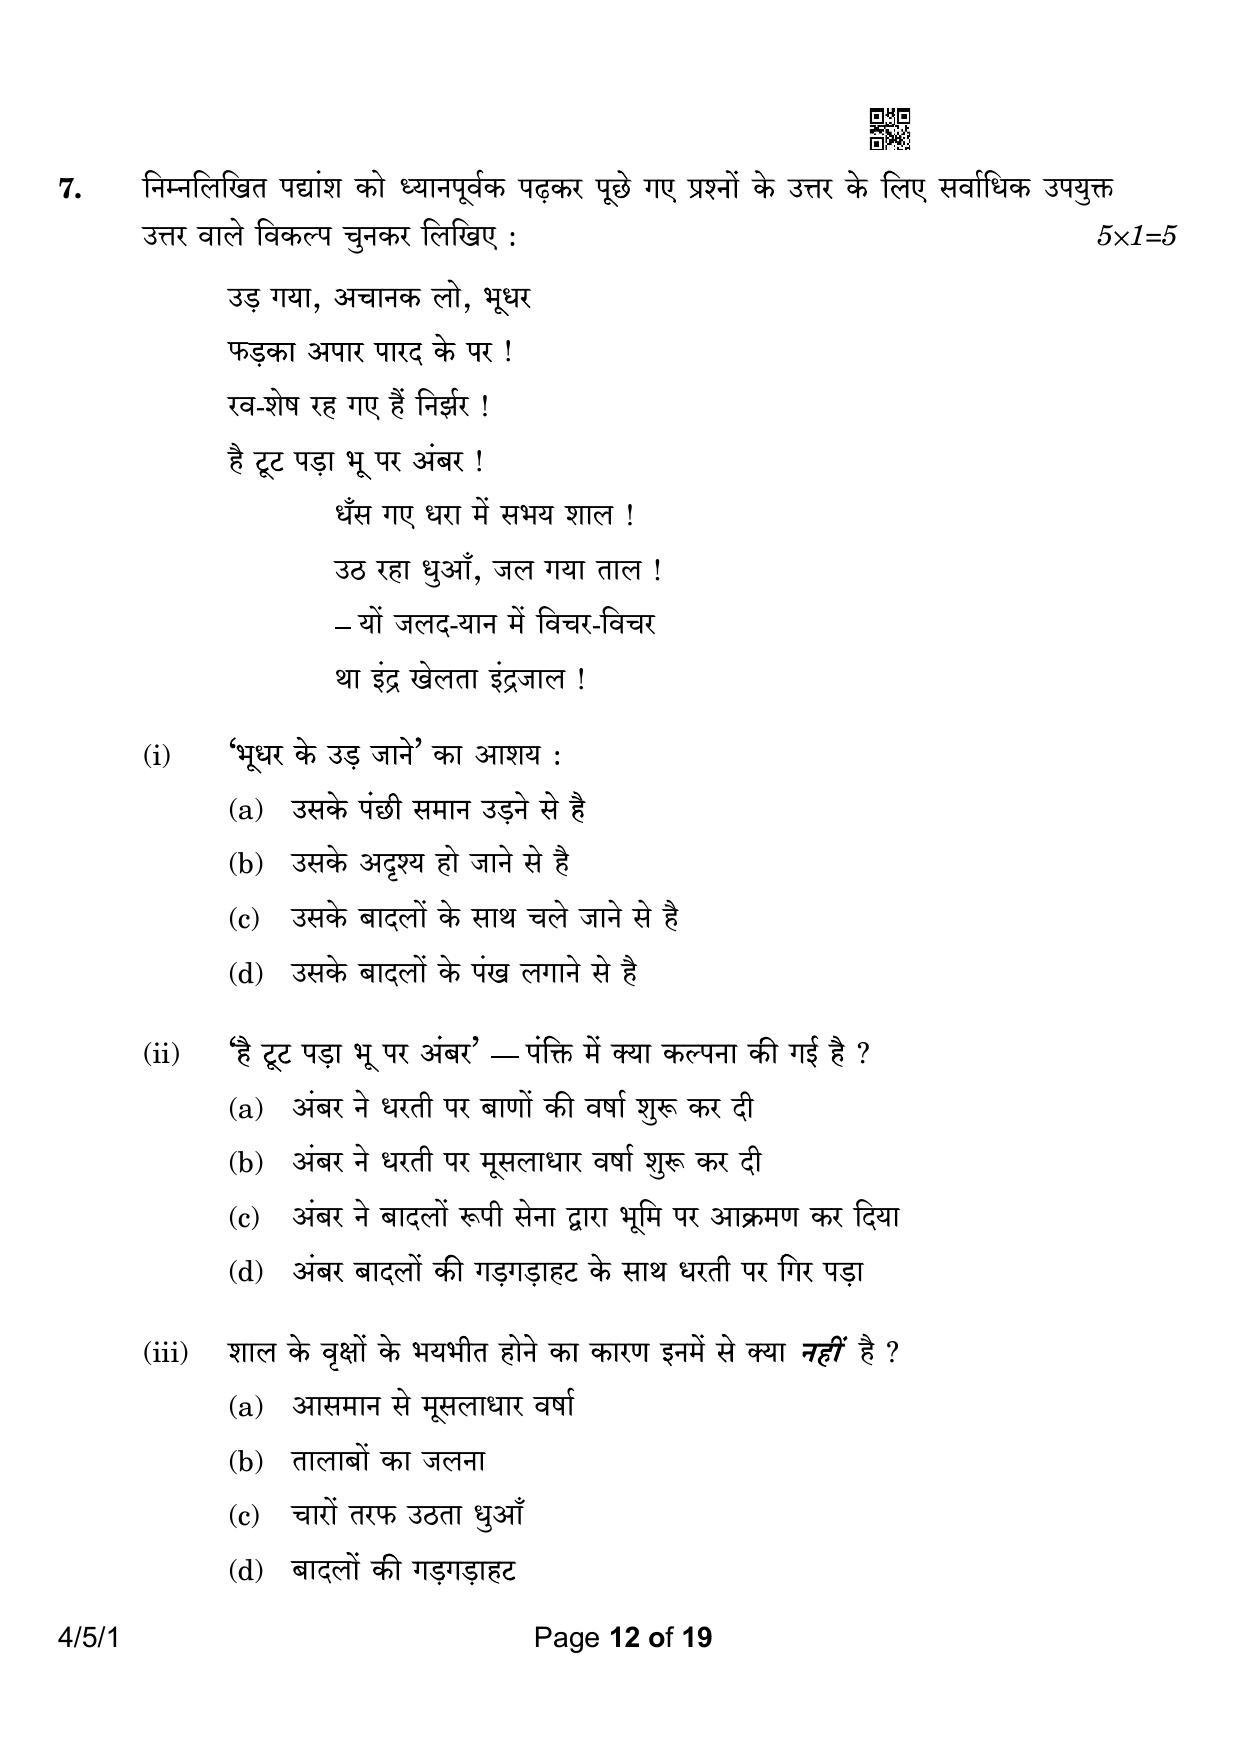 CBSE Class 10 4-5-1 Hindi B 2023 Question Paper - Page 12